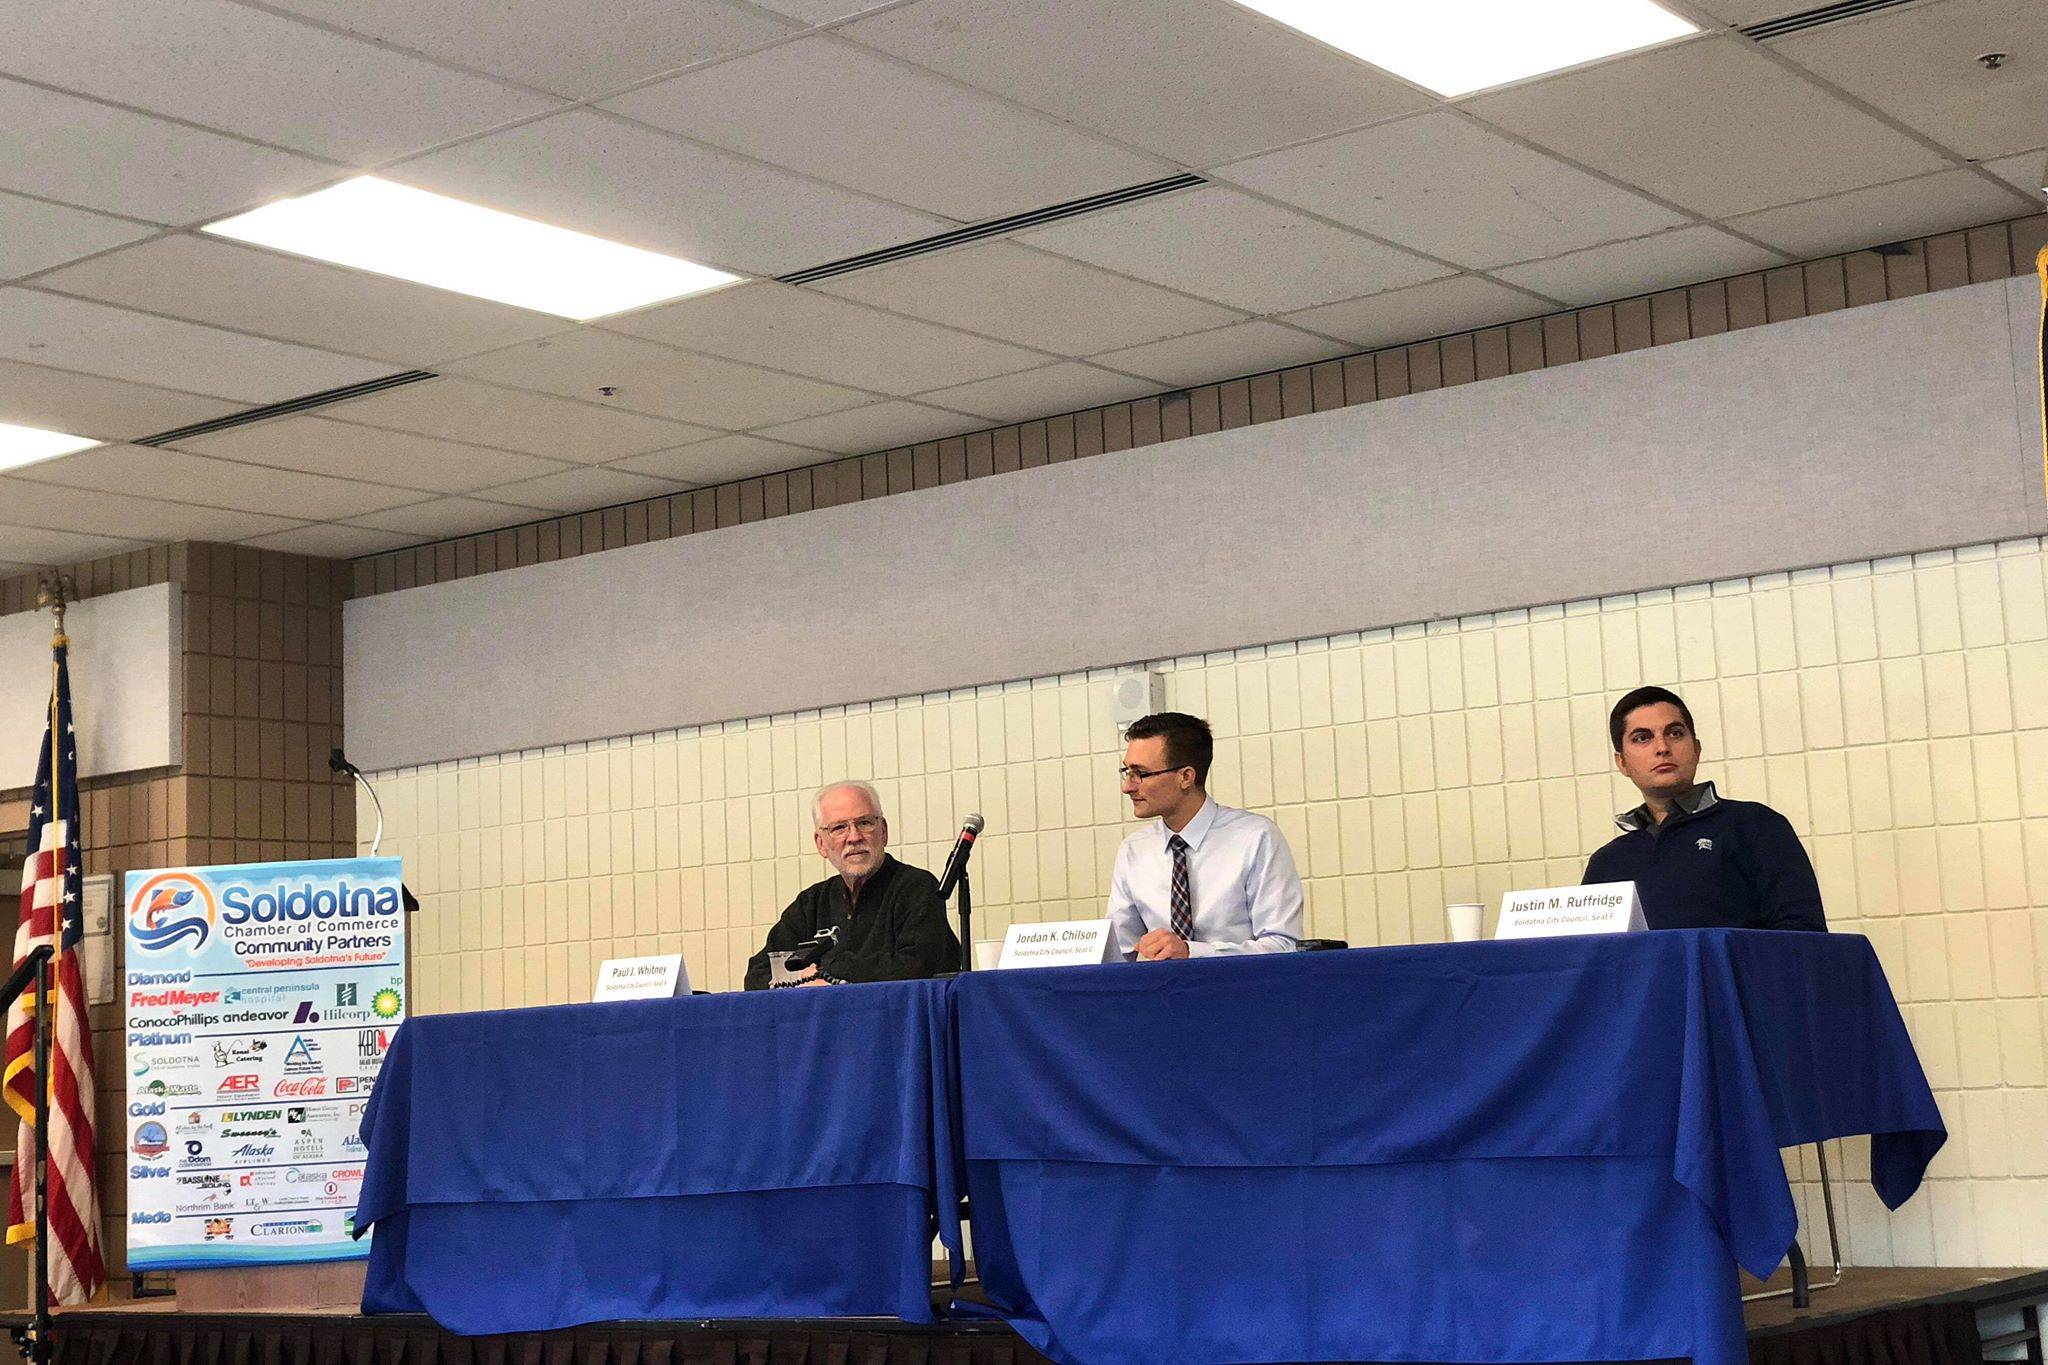 Candidates for Soldotna City Council, Paul Whitney, Jordan Chilson and Justin Ruffridge discuss issues Soldotna is facing on Wednesday, Sept. 26, 2018, in the Soldotna Chamber Luncheon in Soldotna, Alaska. (Photo by Victoria Petersen/Peninsula Clarion)